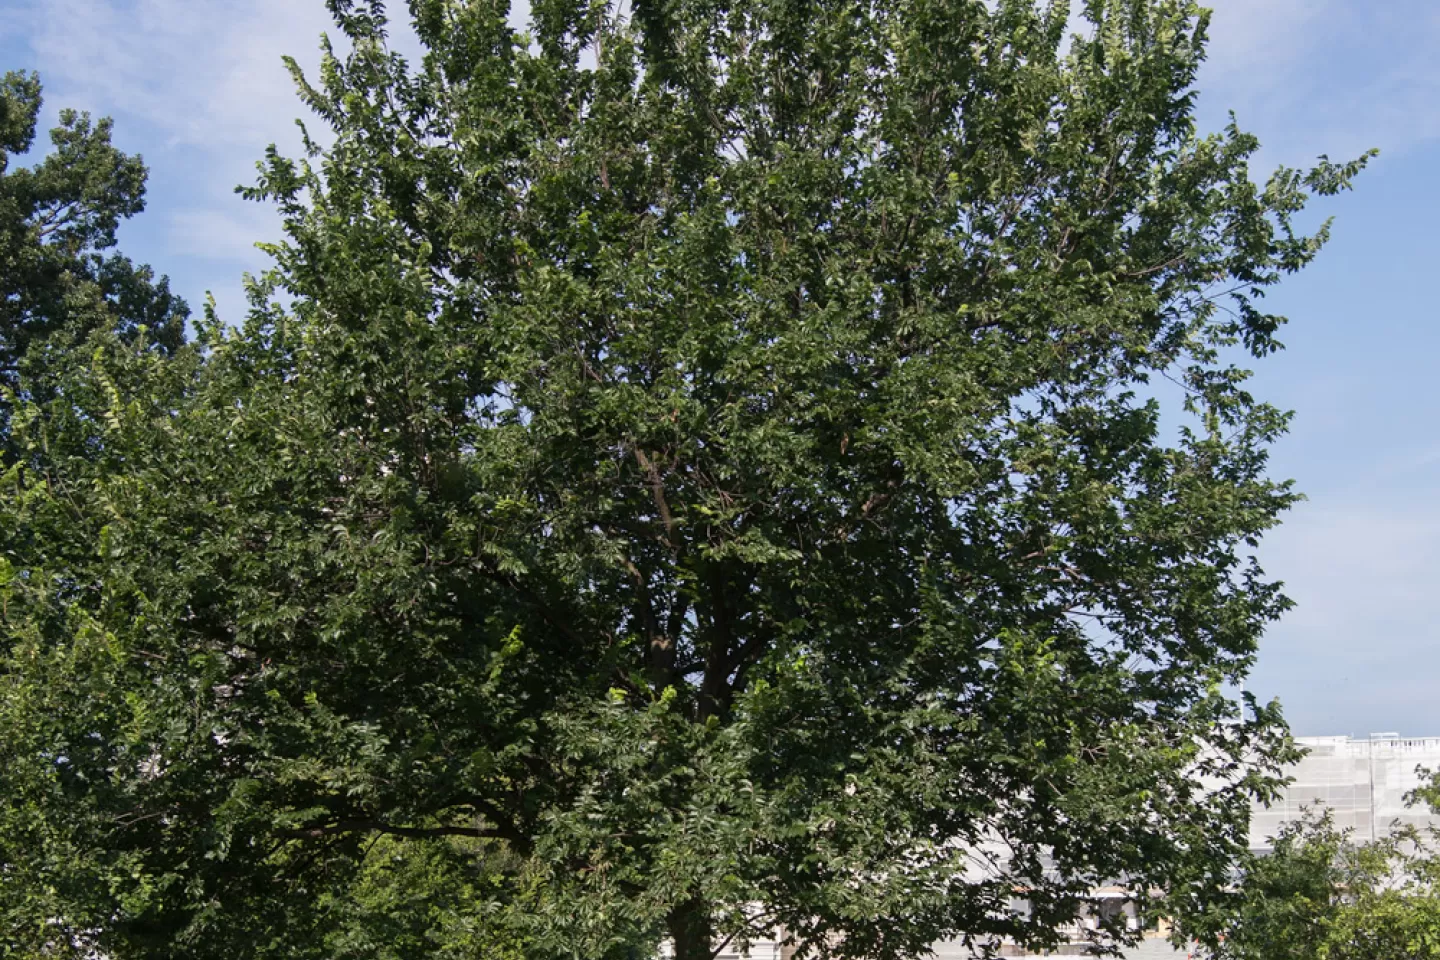 The Senator Kerrey tree on the U.S. Capitol Grounds during summer.